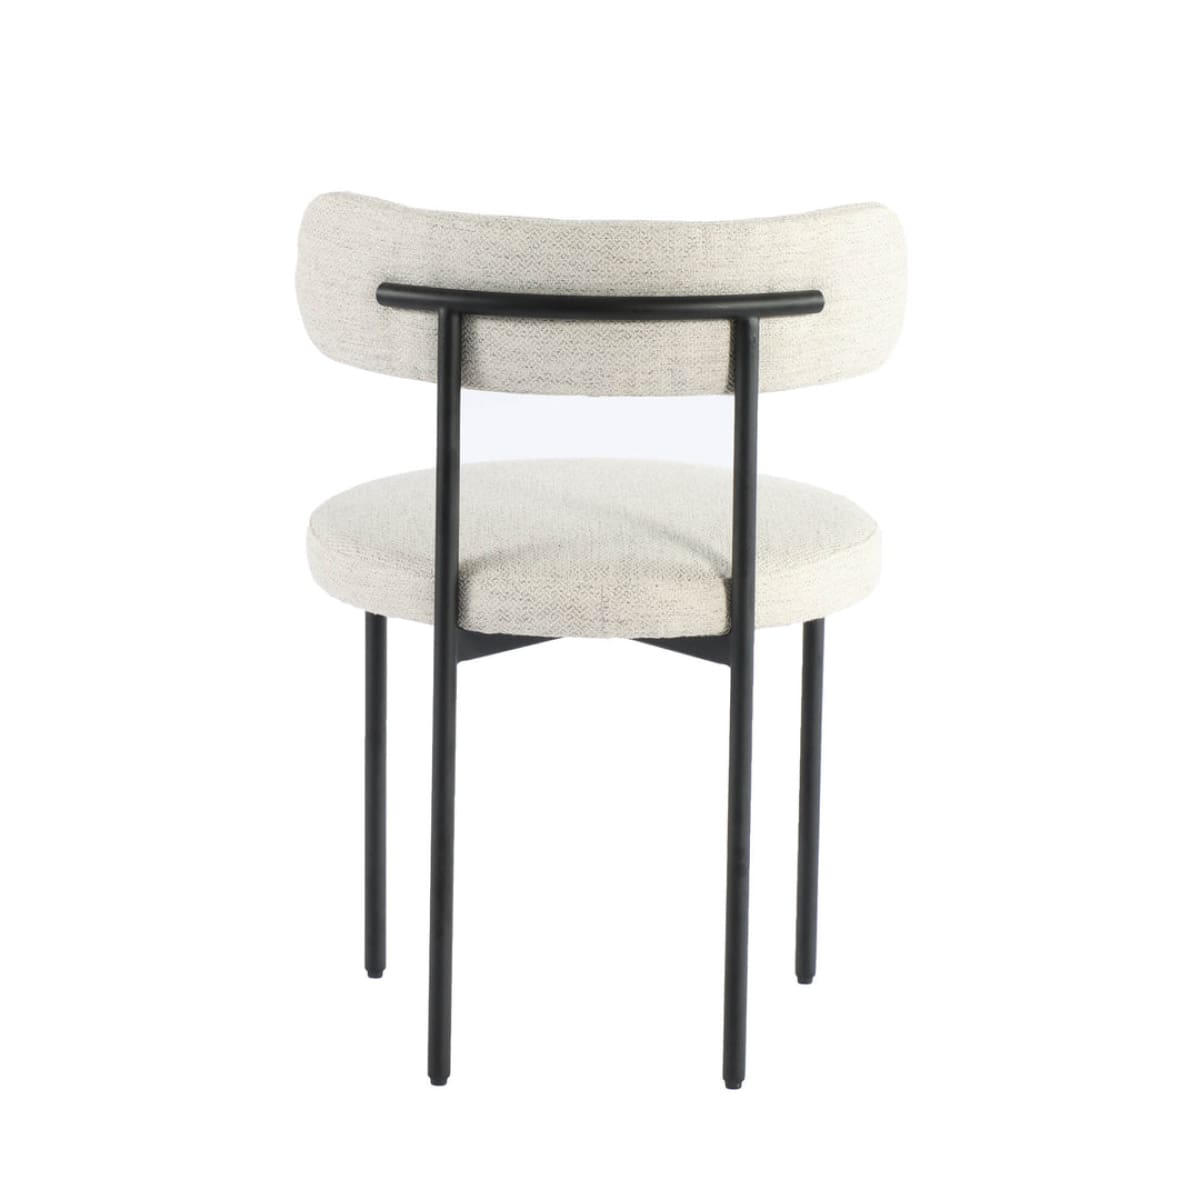 Cleo Dining Chair - Macadamia Travertine - lh-import-dining-chairs